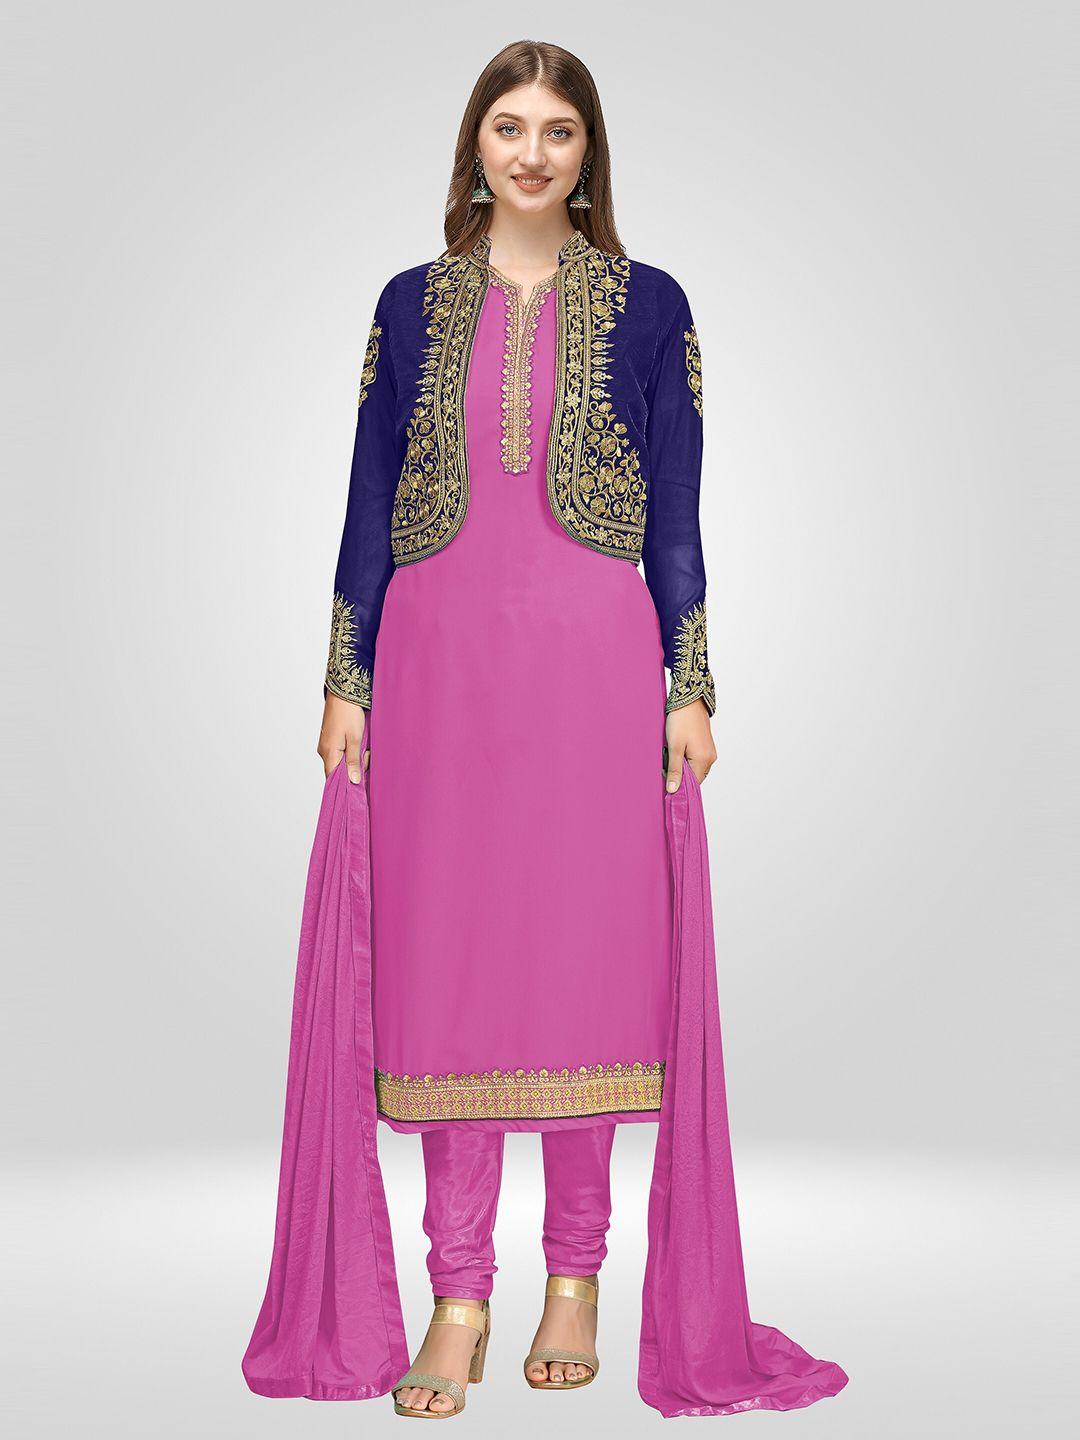 nivah fashion women fuchsia & blue embroidered unstitched dress material